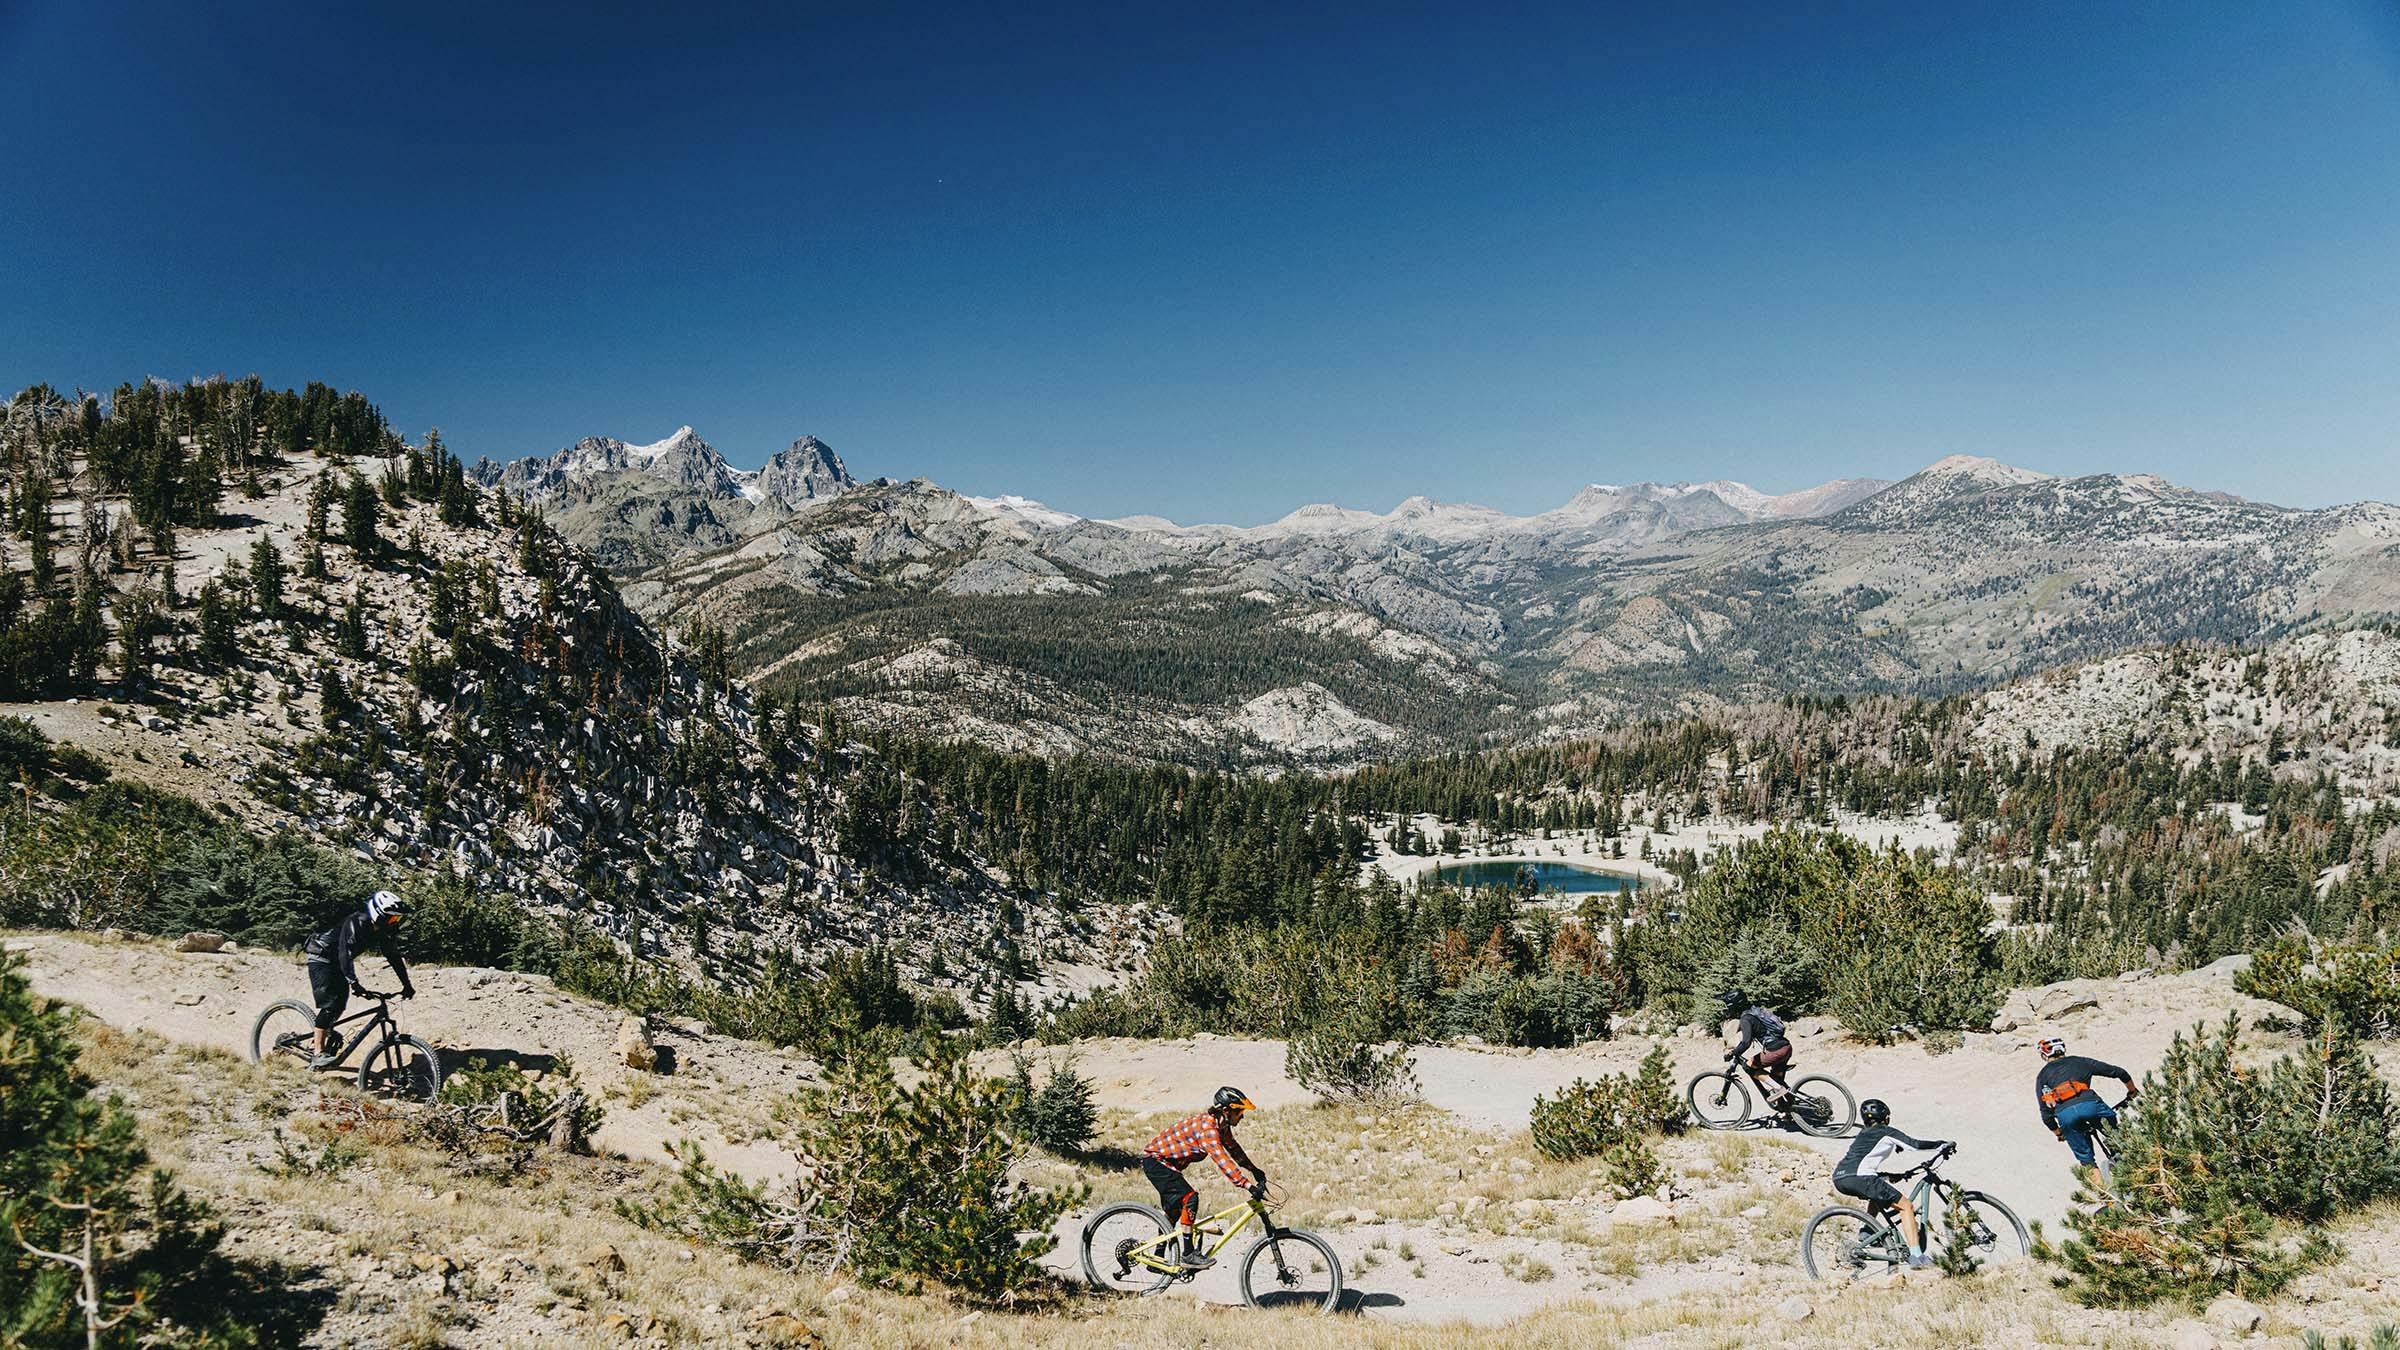 Mountain bikers riding down the Mammoth Bike Park trails